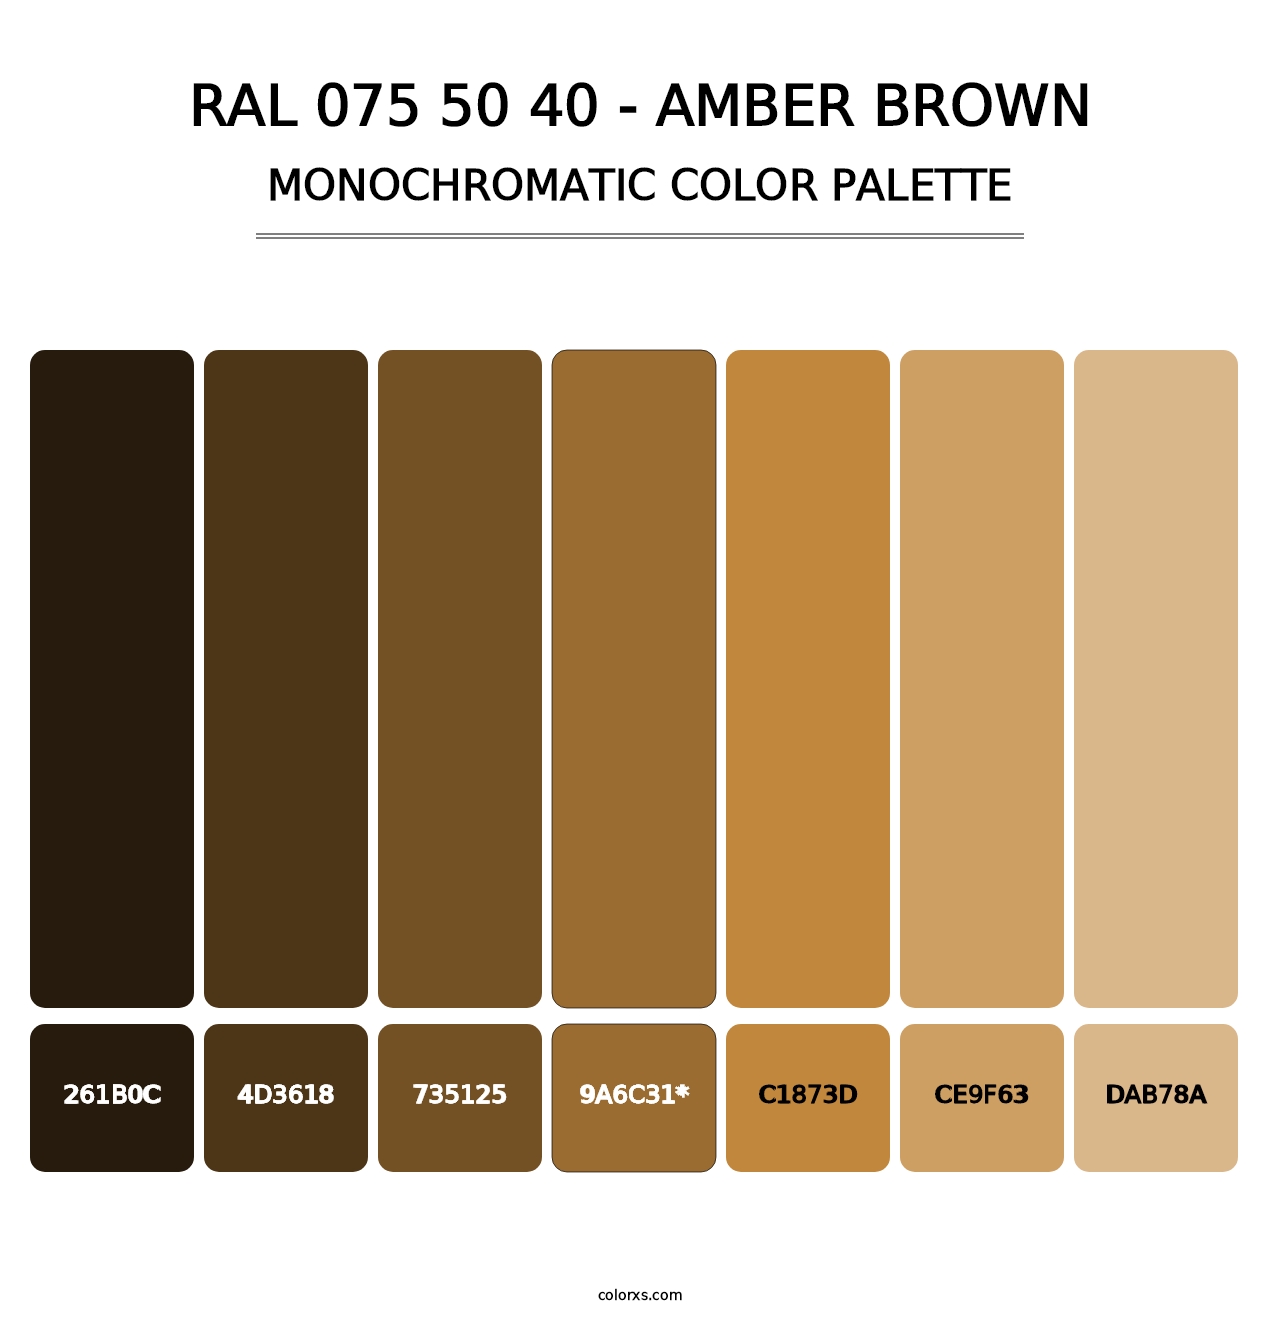 RAL 075 50 40 - Amber Brown - Monochromatic Color Palette